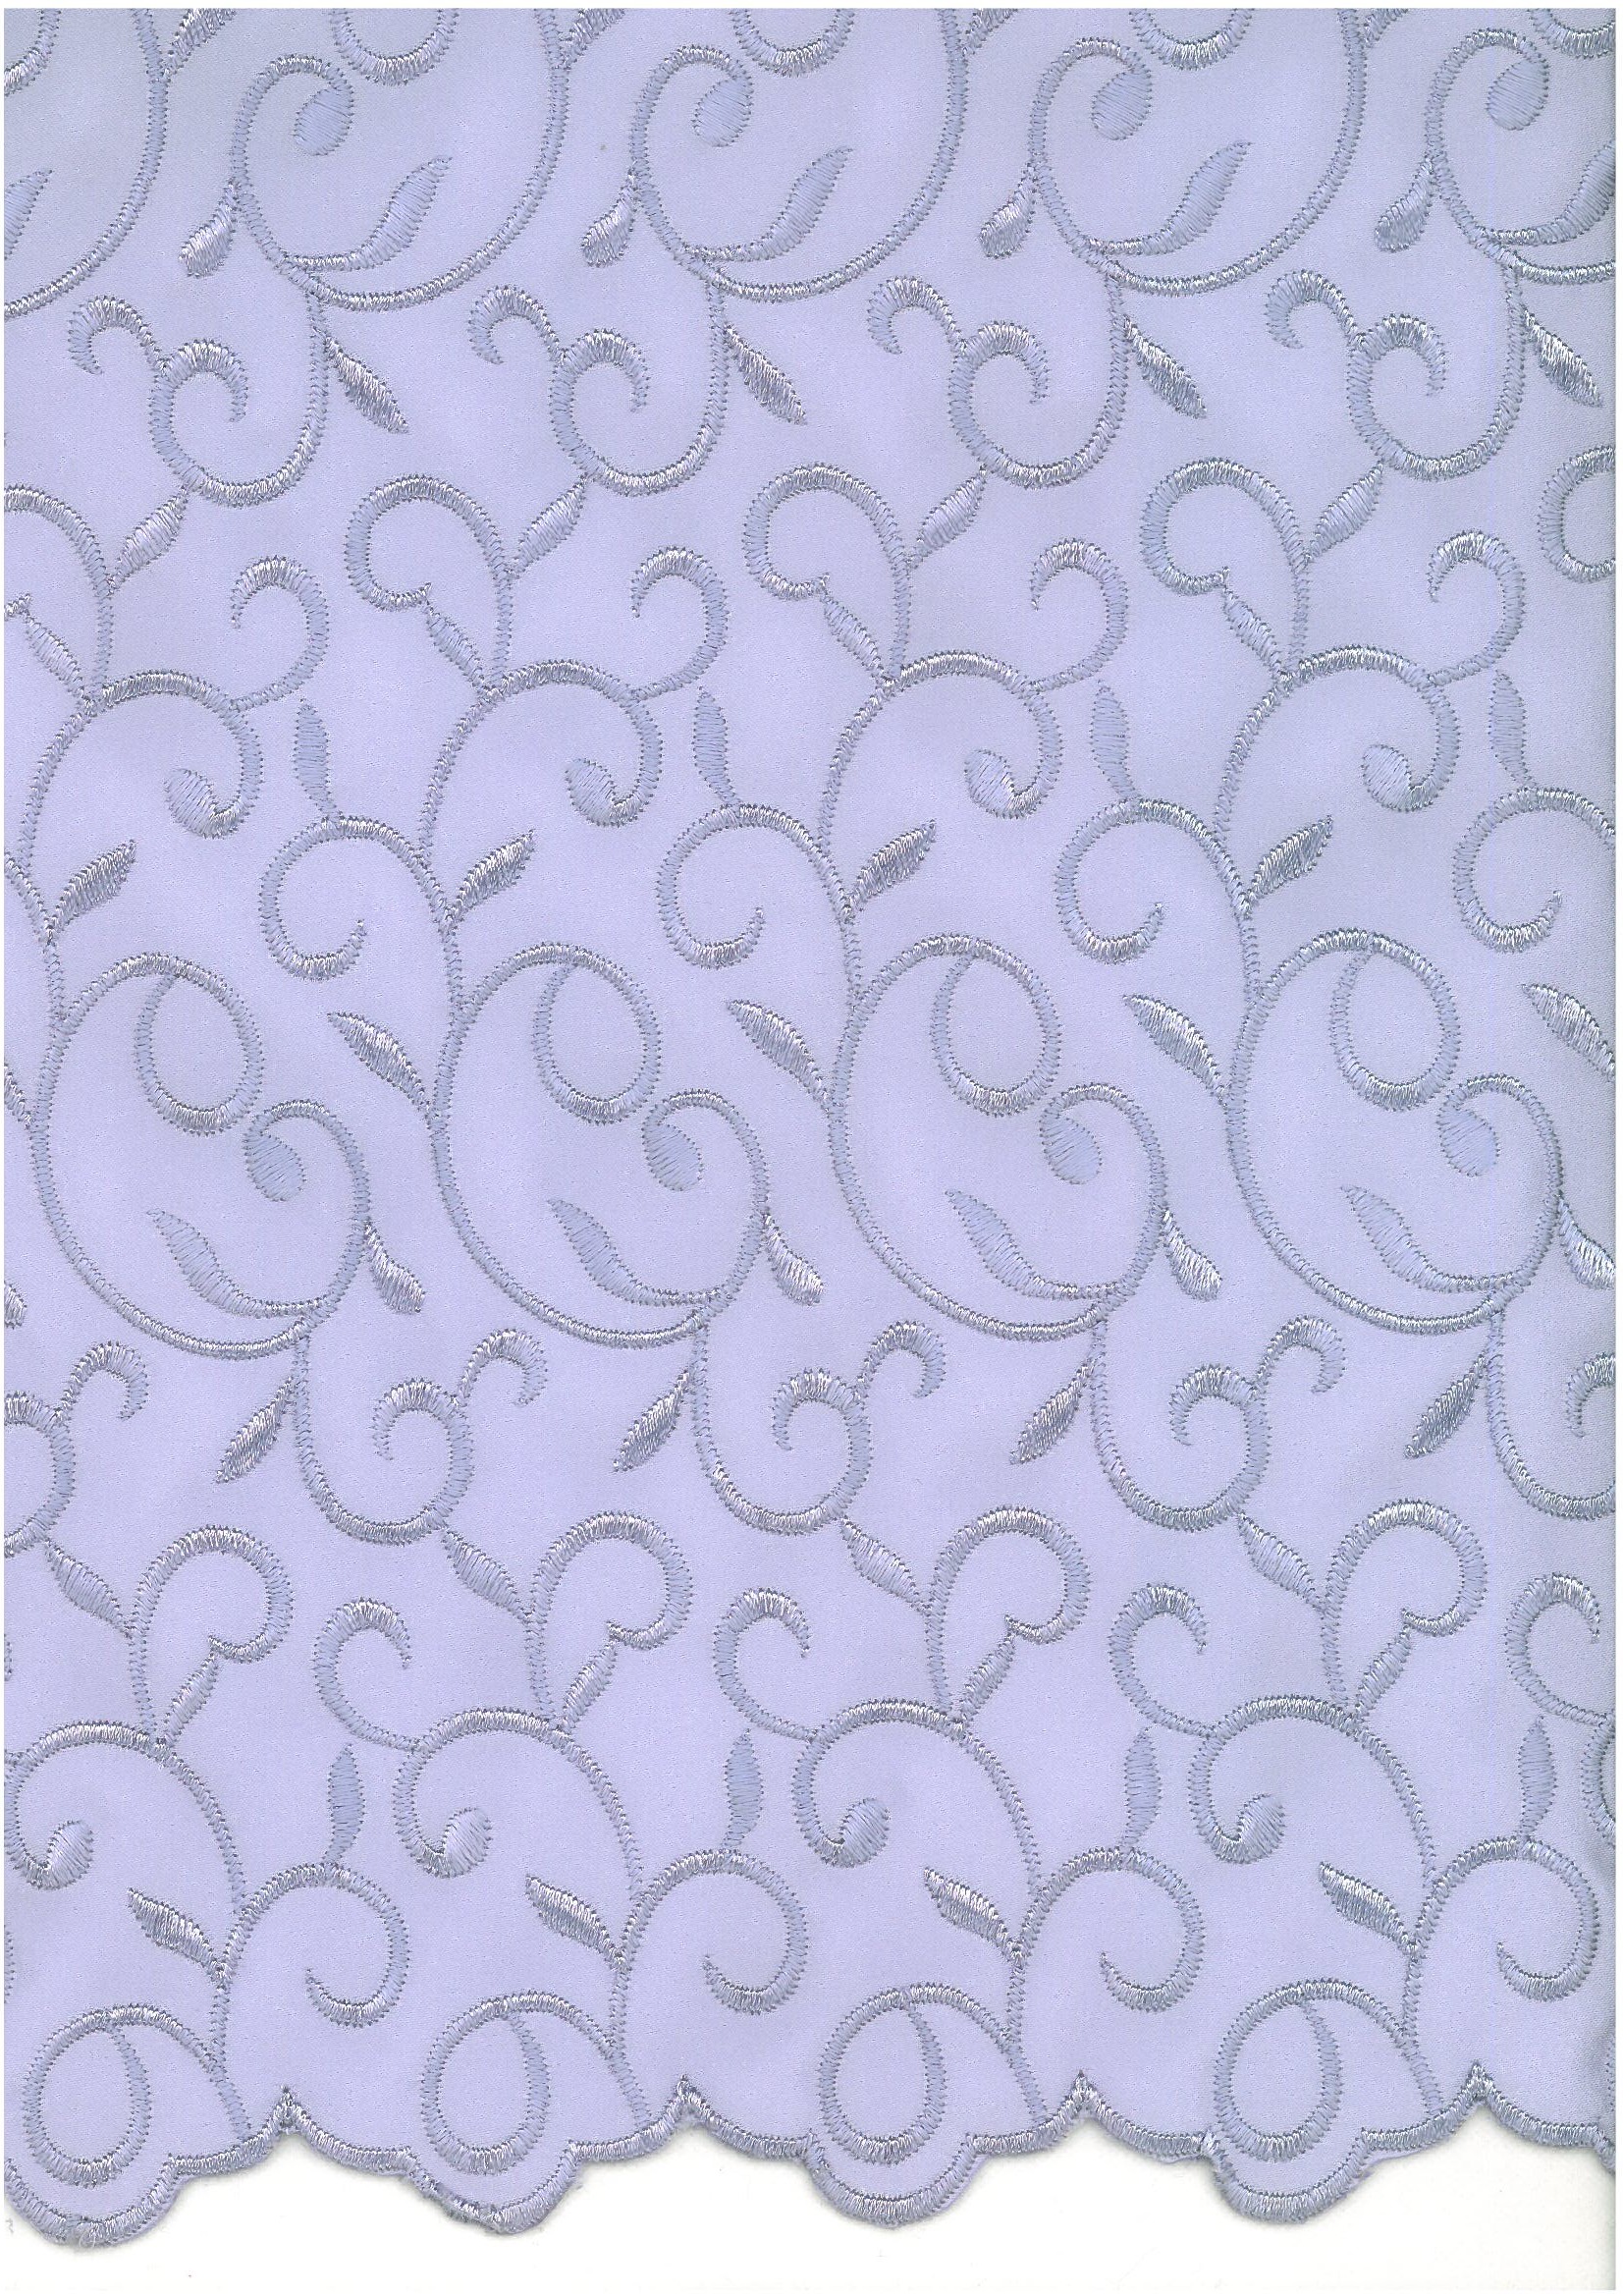 EMBROIDERED DUCHESS SATIN - LILAC/LILAC